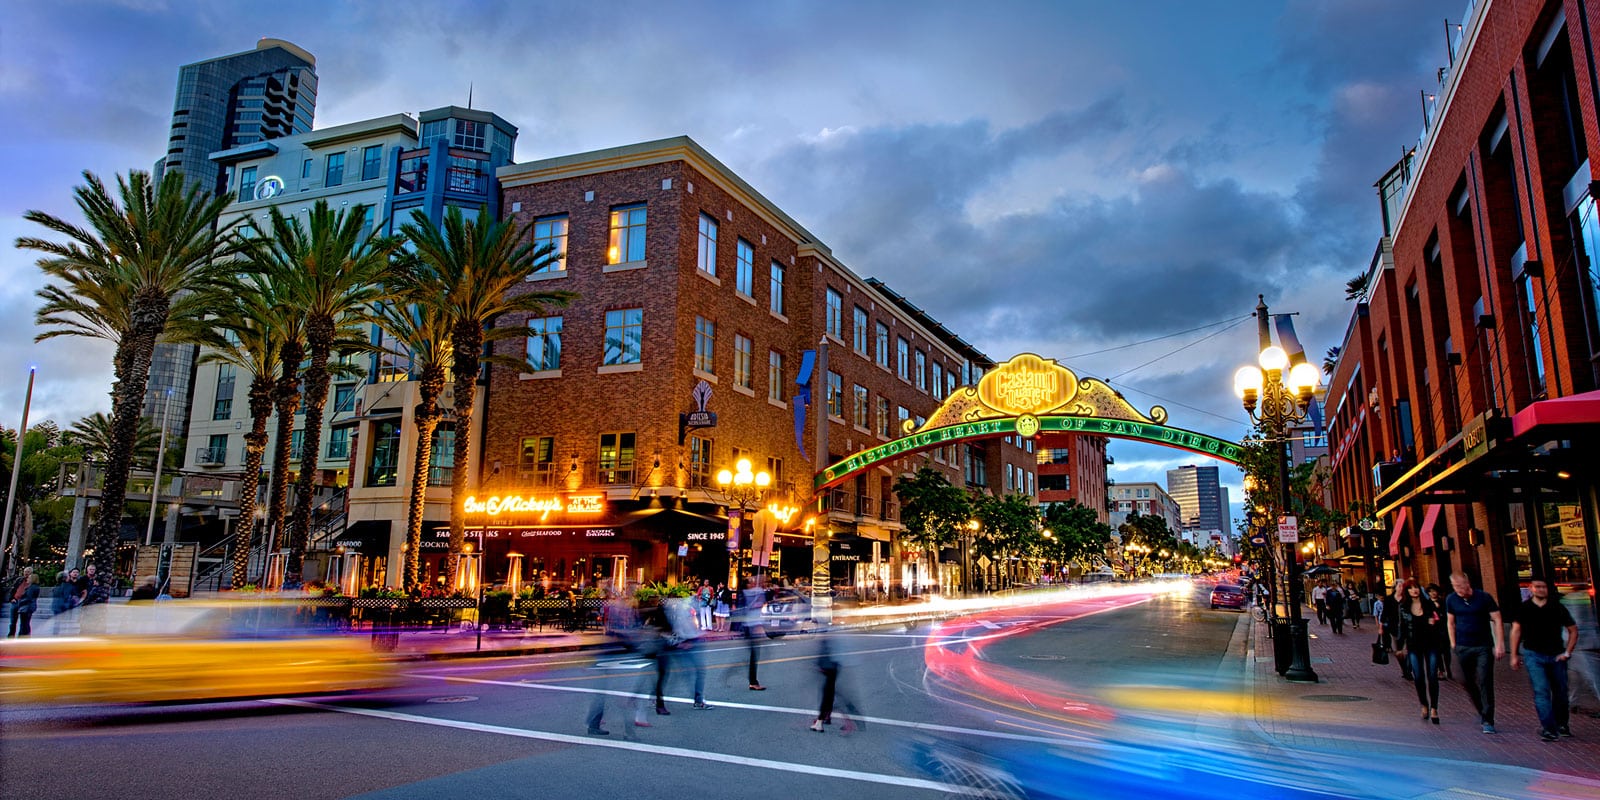 Things to do in downtown San Diego